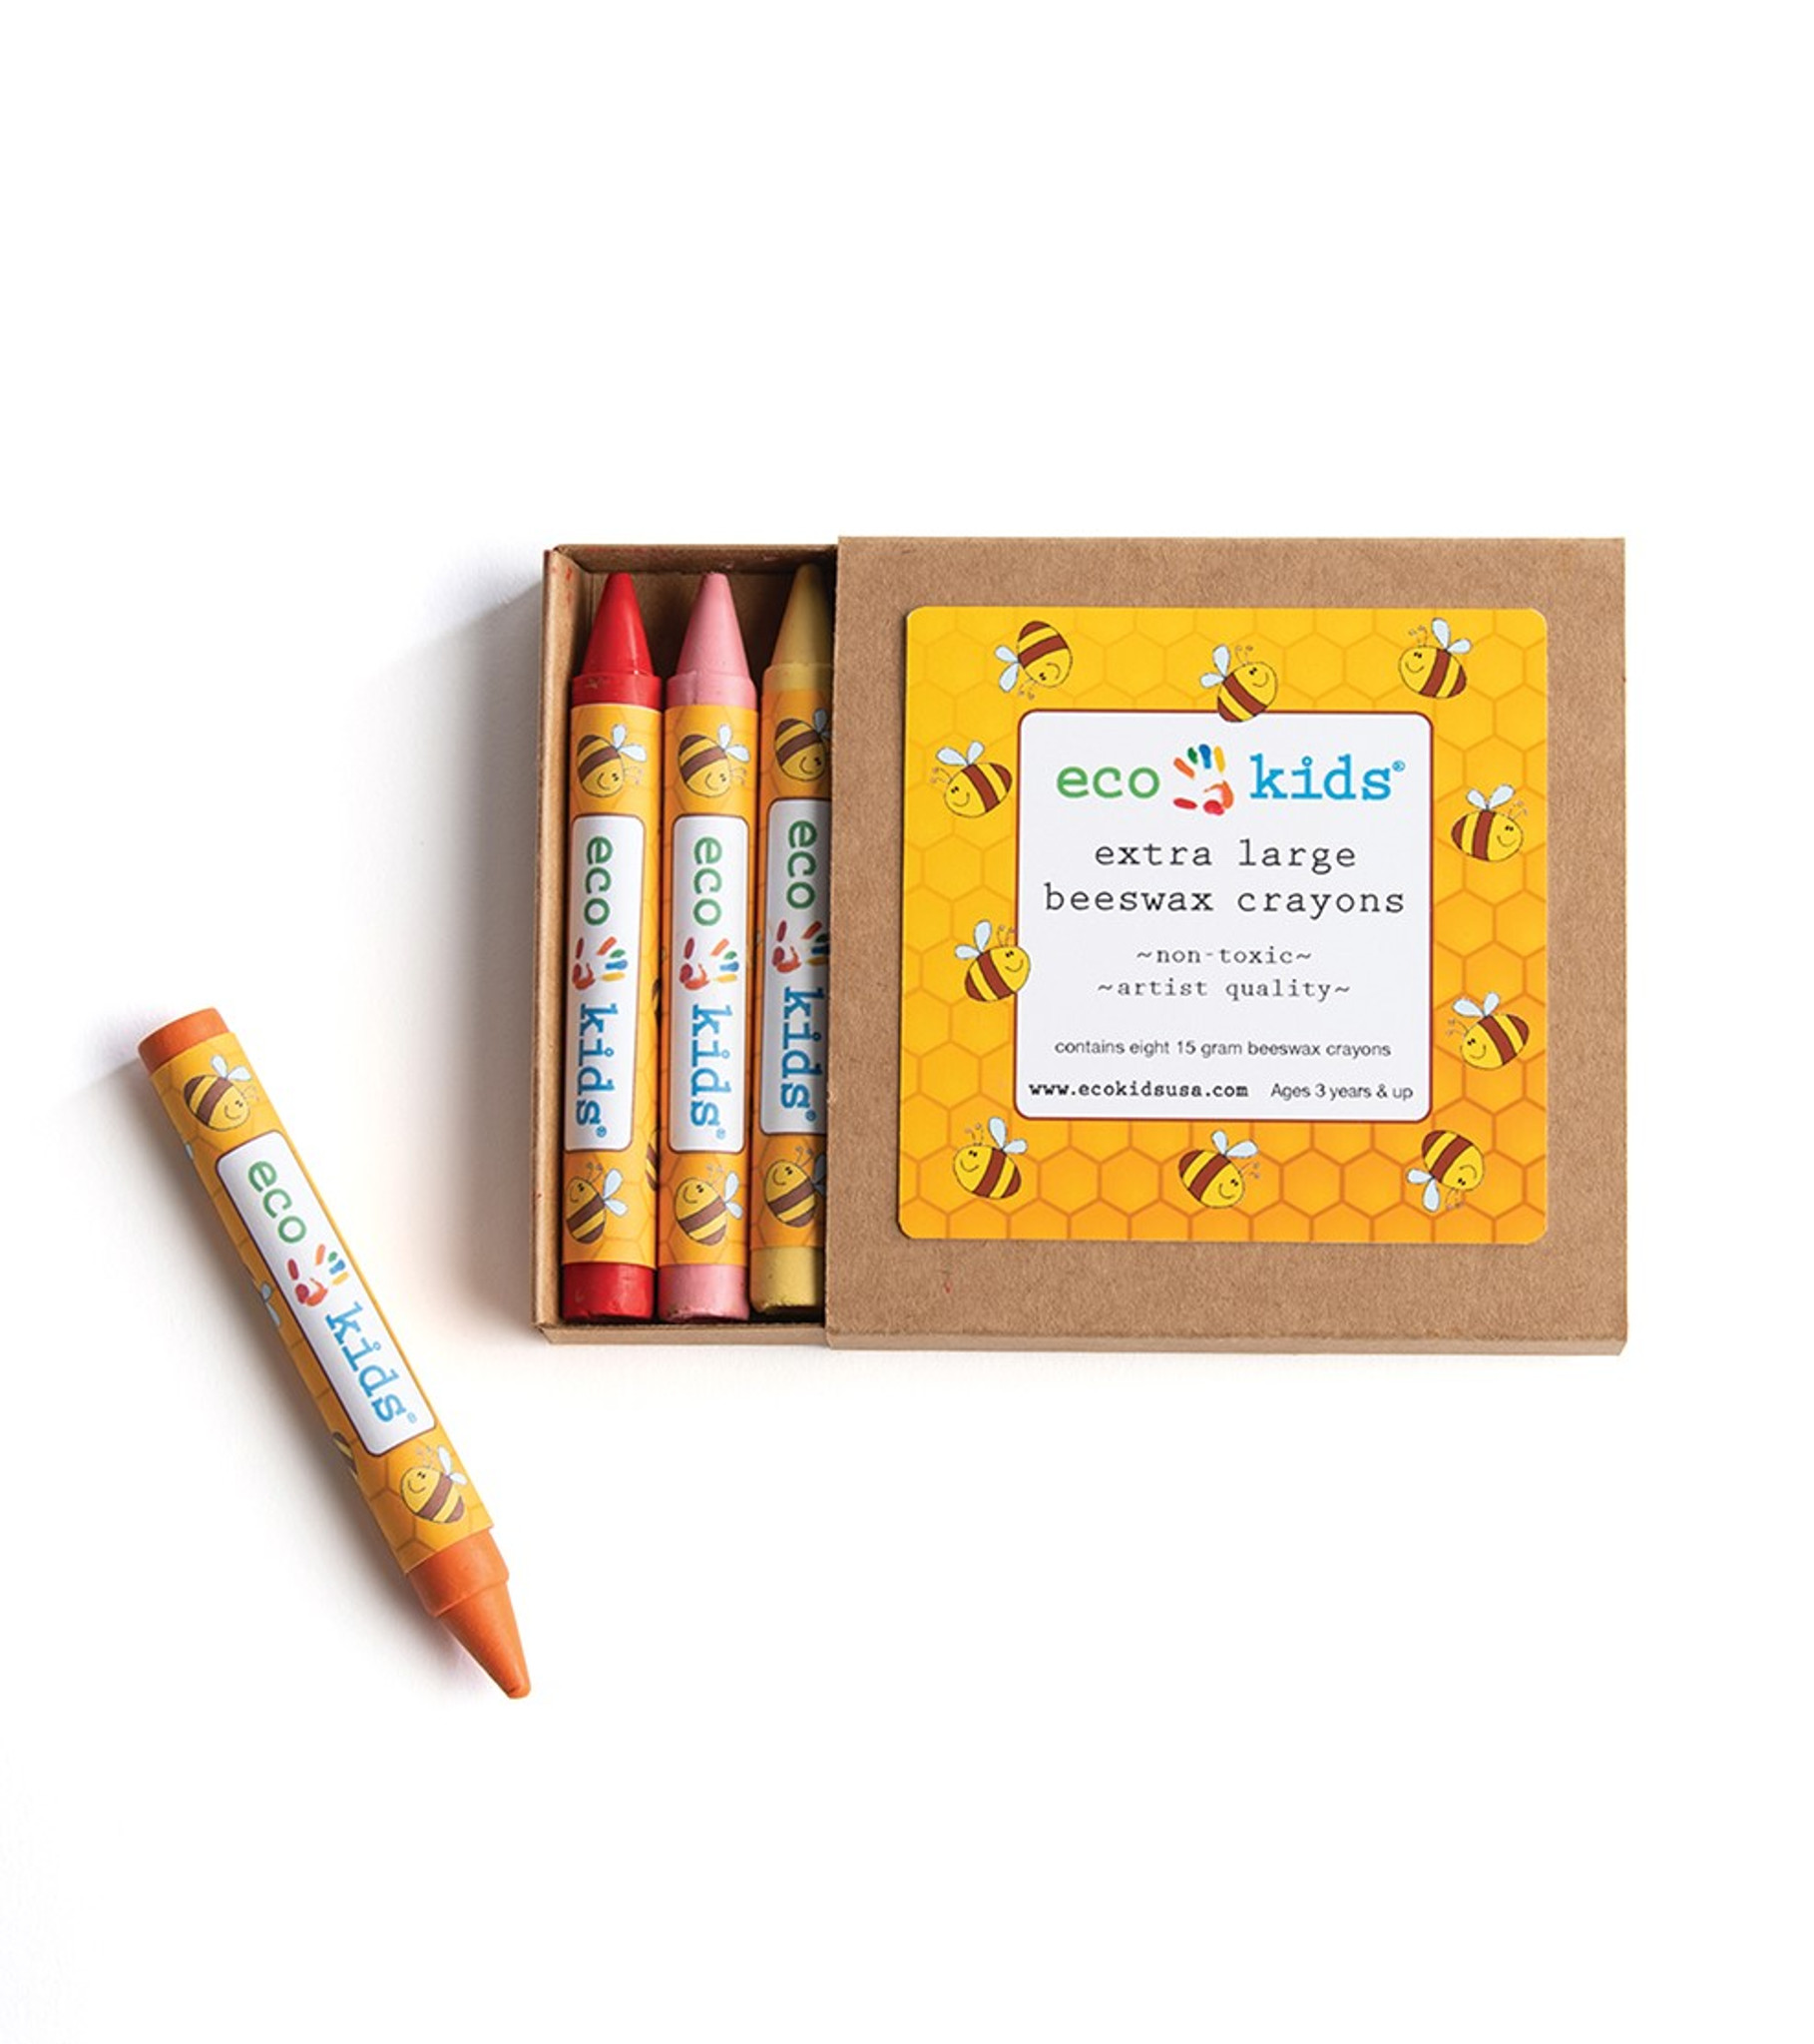 beeswax crayons - extra large